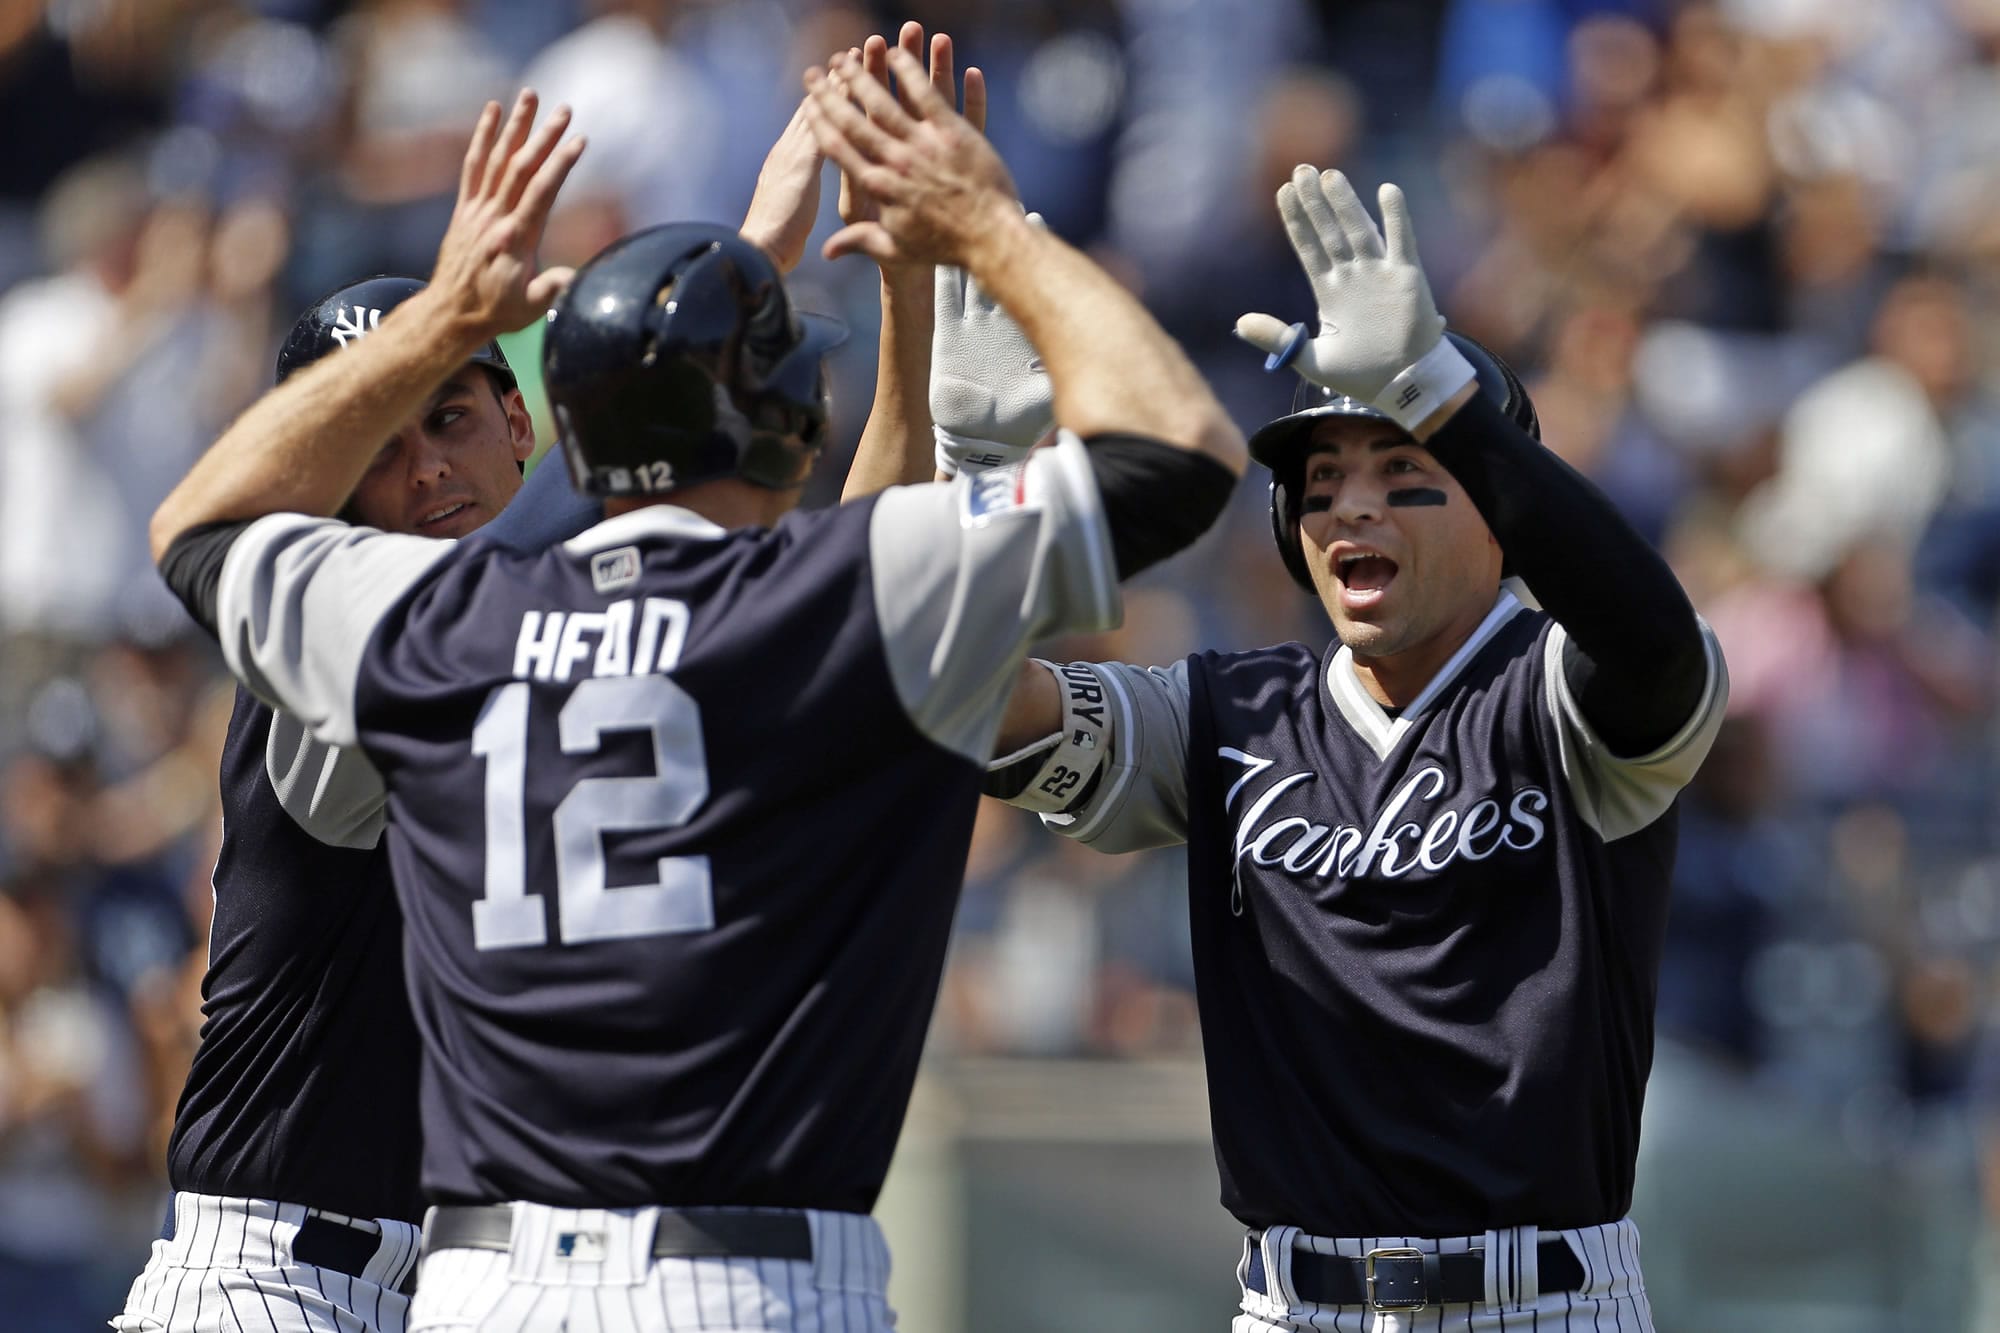 New York Yankees Jacoby Ellsbury, right, celebrates a three-run home run with Chase Headley (12) and Greg Bird during the fourth inning of a baseball game against the Seattle Mariners on Saturday, Aug. 26, 2017, in New York.